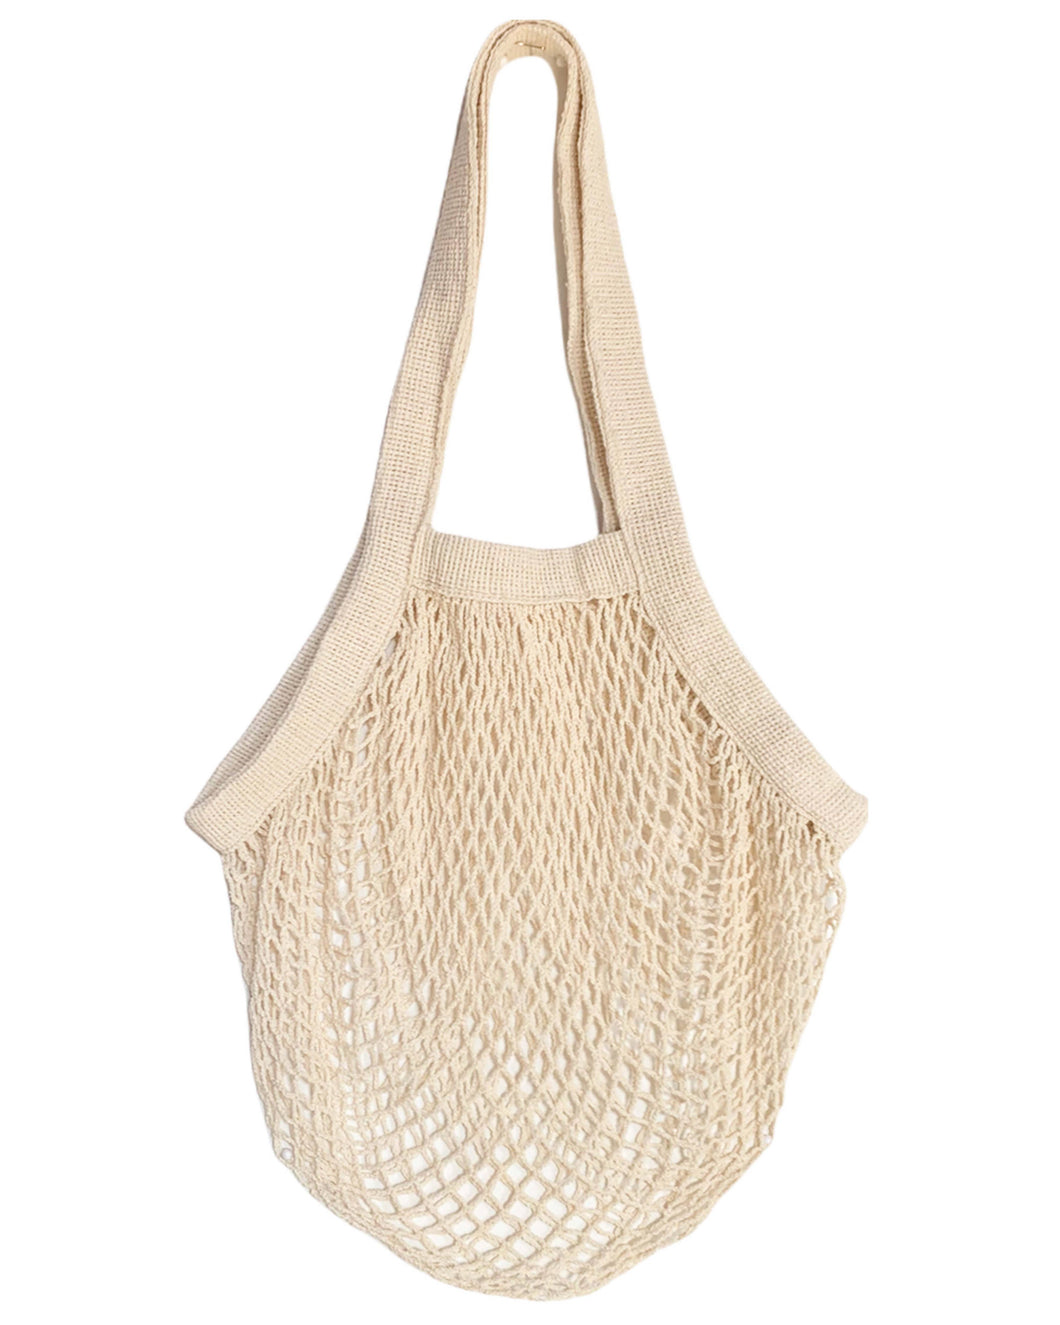 PILLOWPIA - the french market bag no.2 in natural